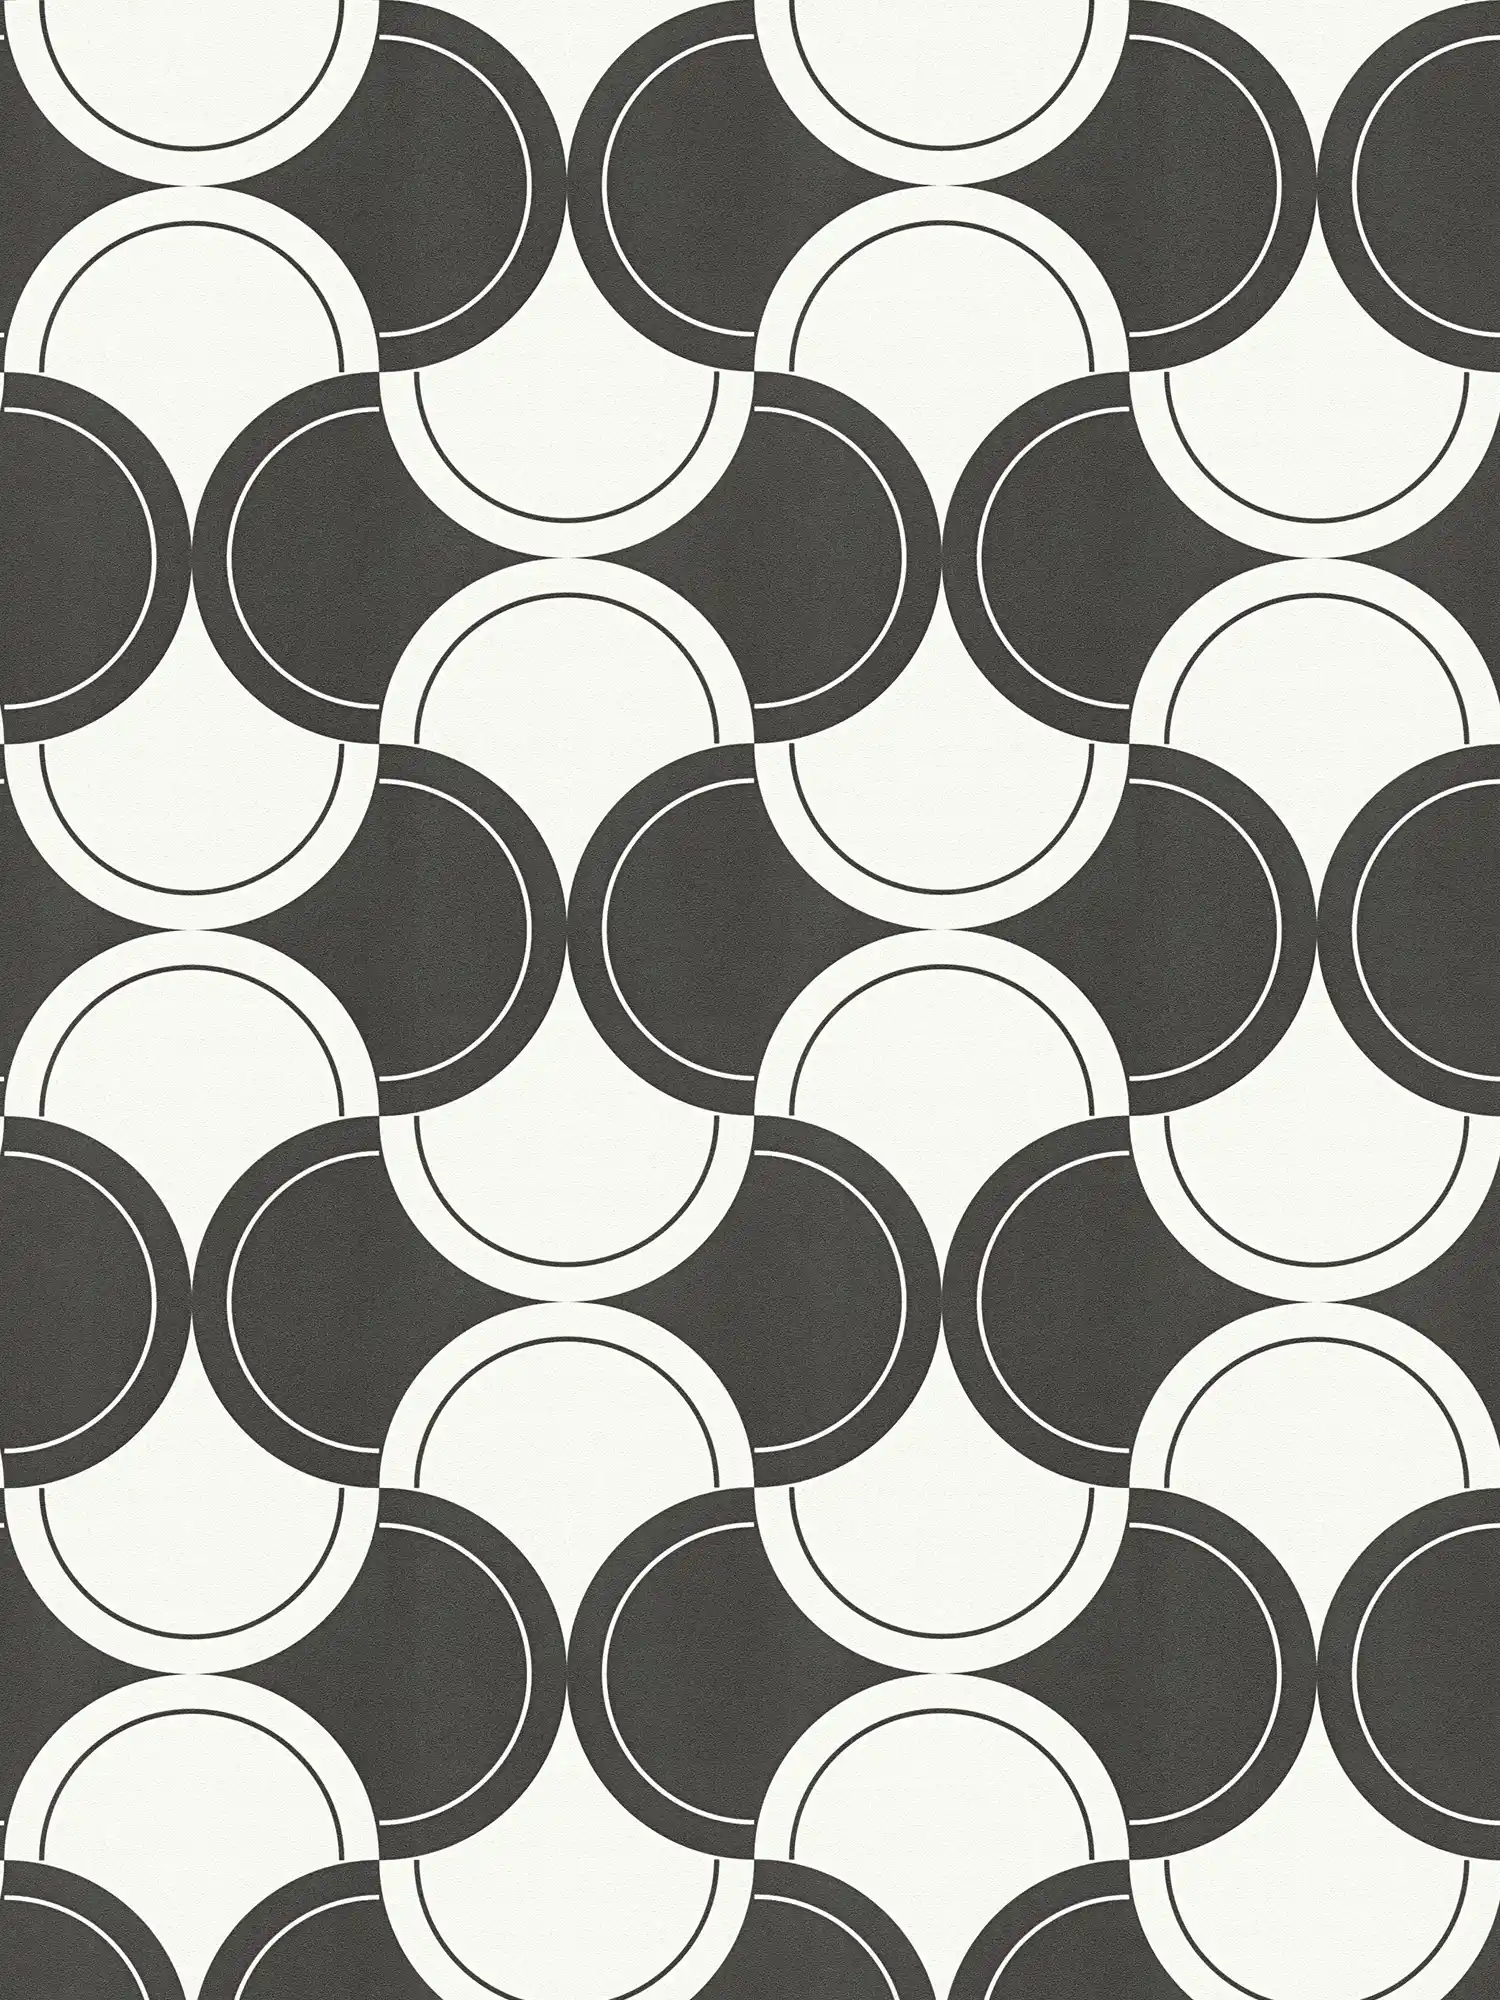         Non-woven wallpaper retro pattern with circles 70s style - black and white
    